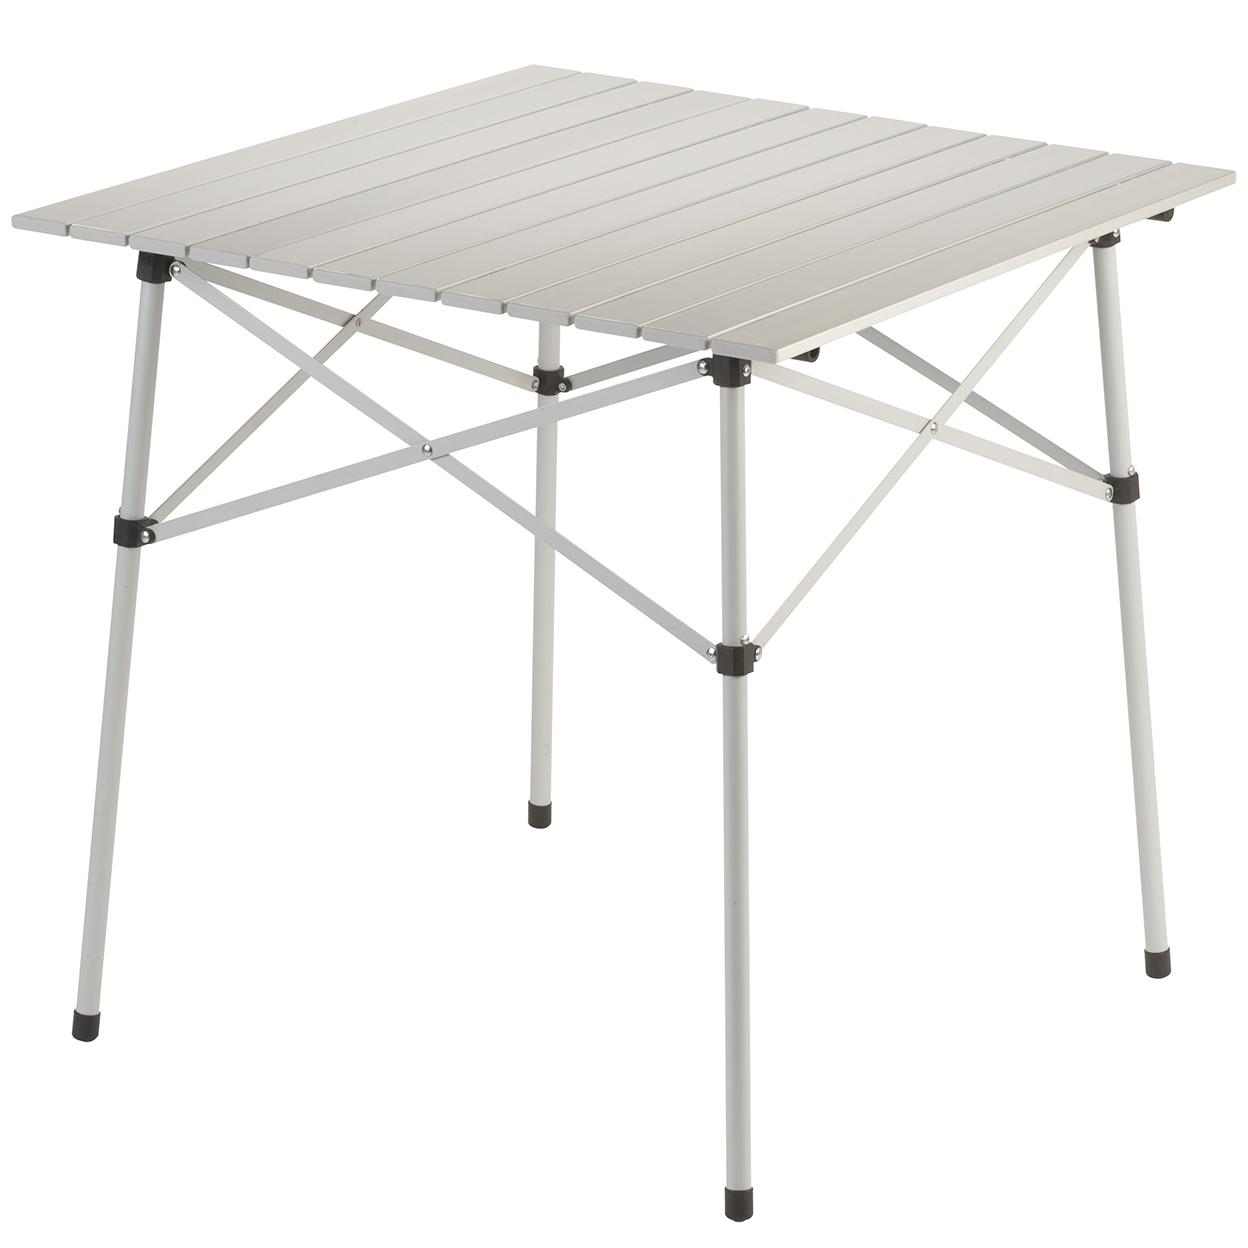 27.5in Coleman Ultra Compact Outdoor Folding Camping Table for $35 Shipped